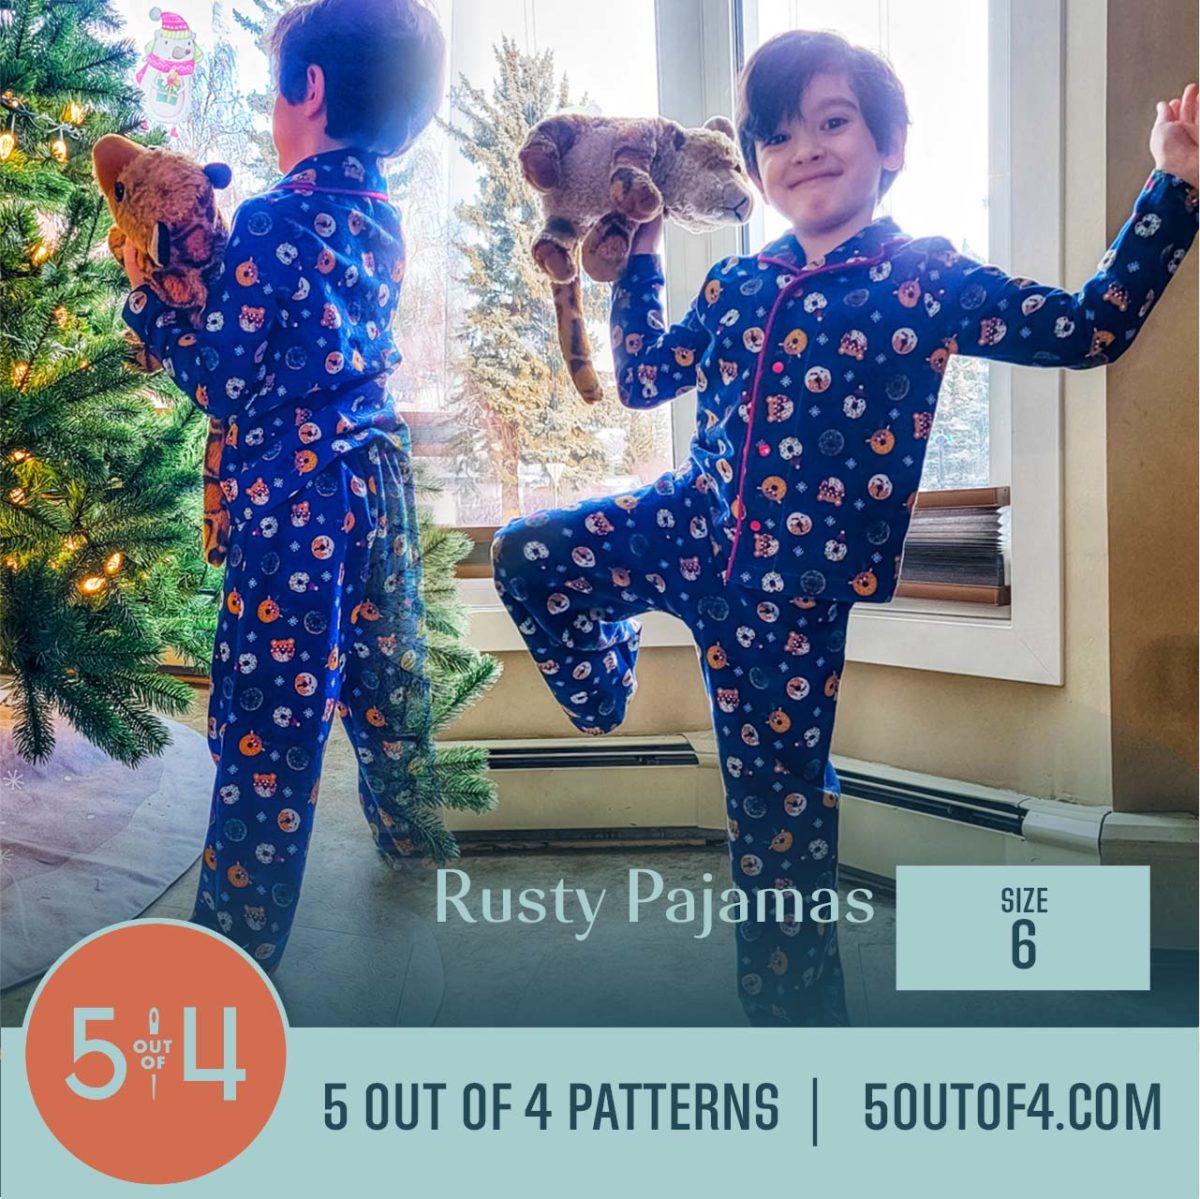 5oo4 Woven Pajama Pattern for Kids size 6